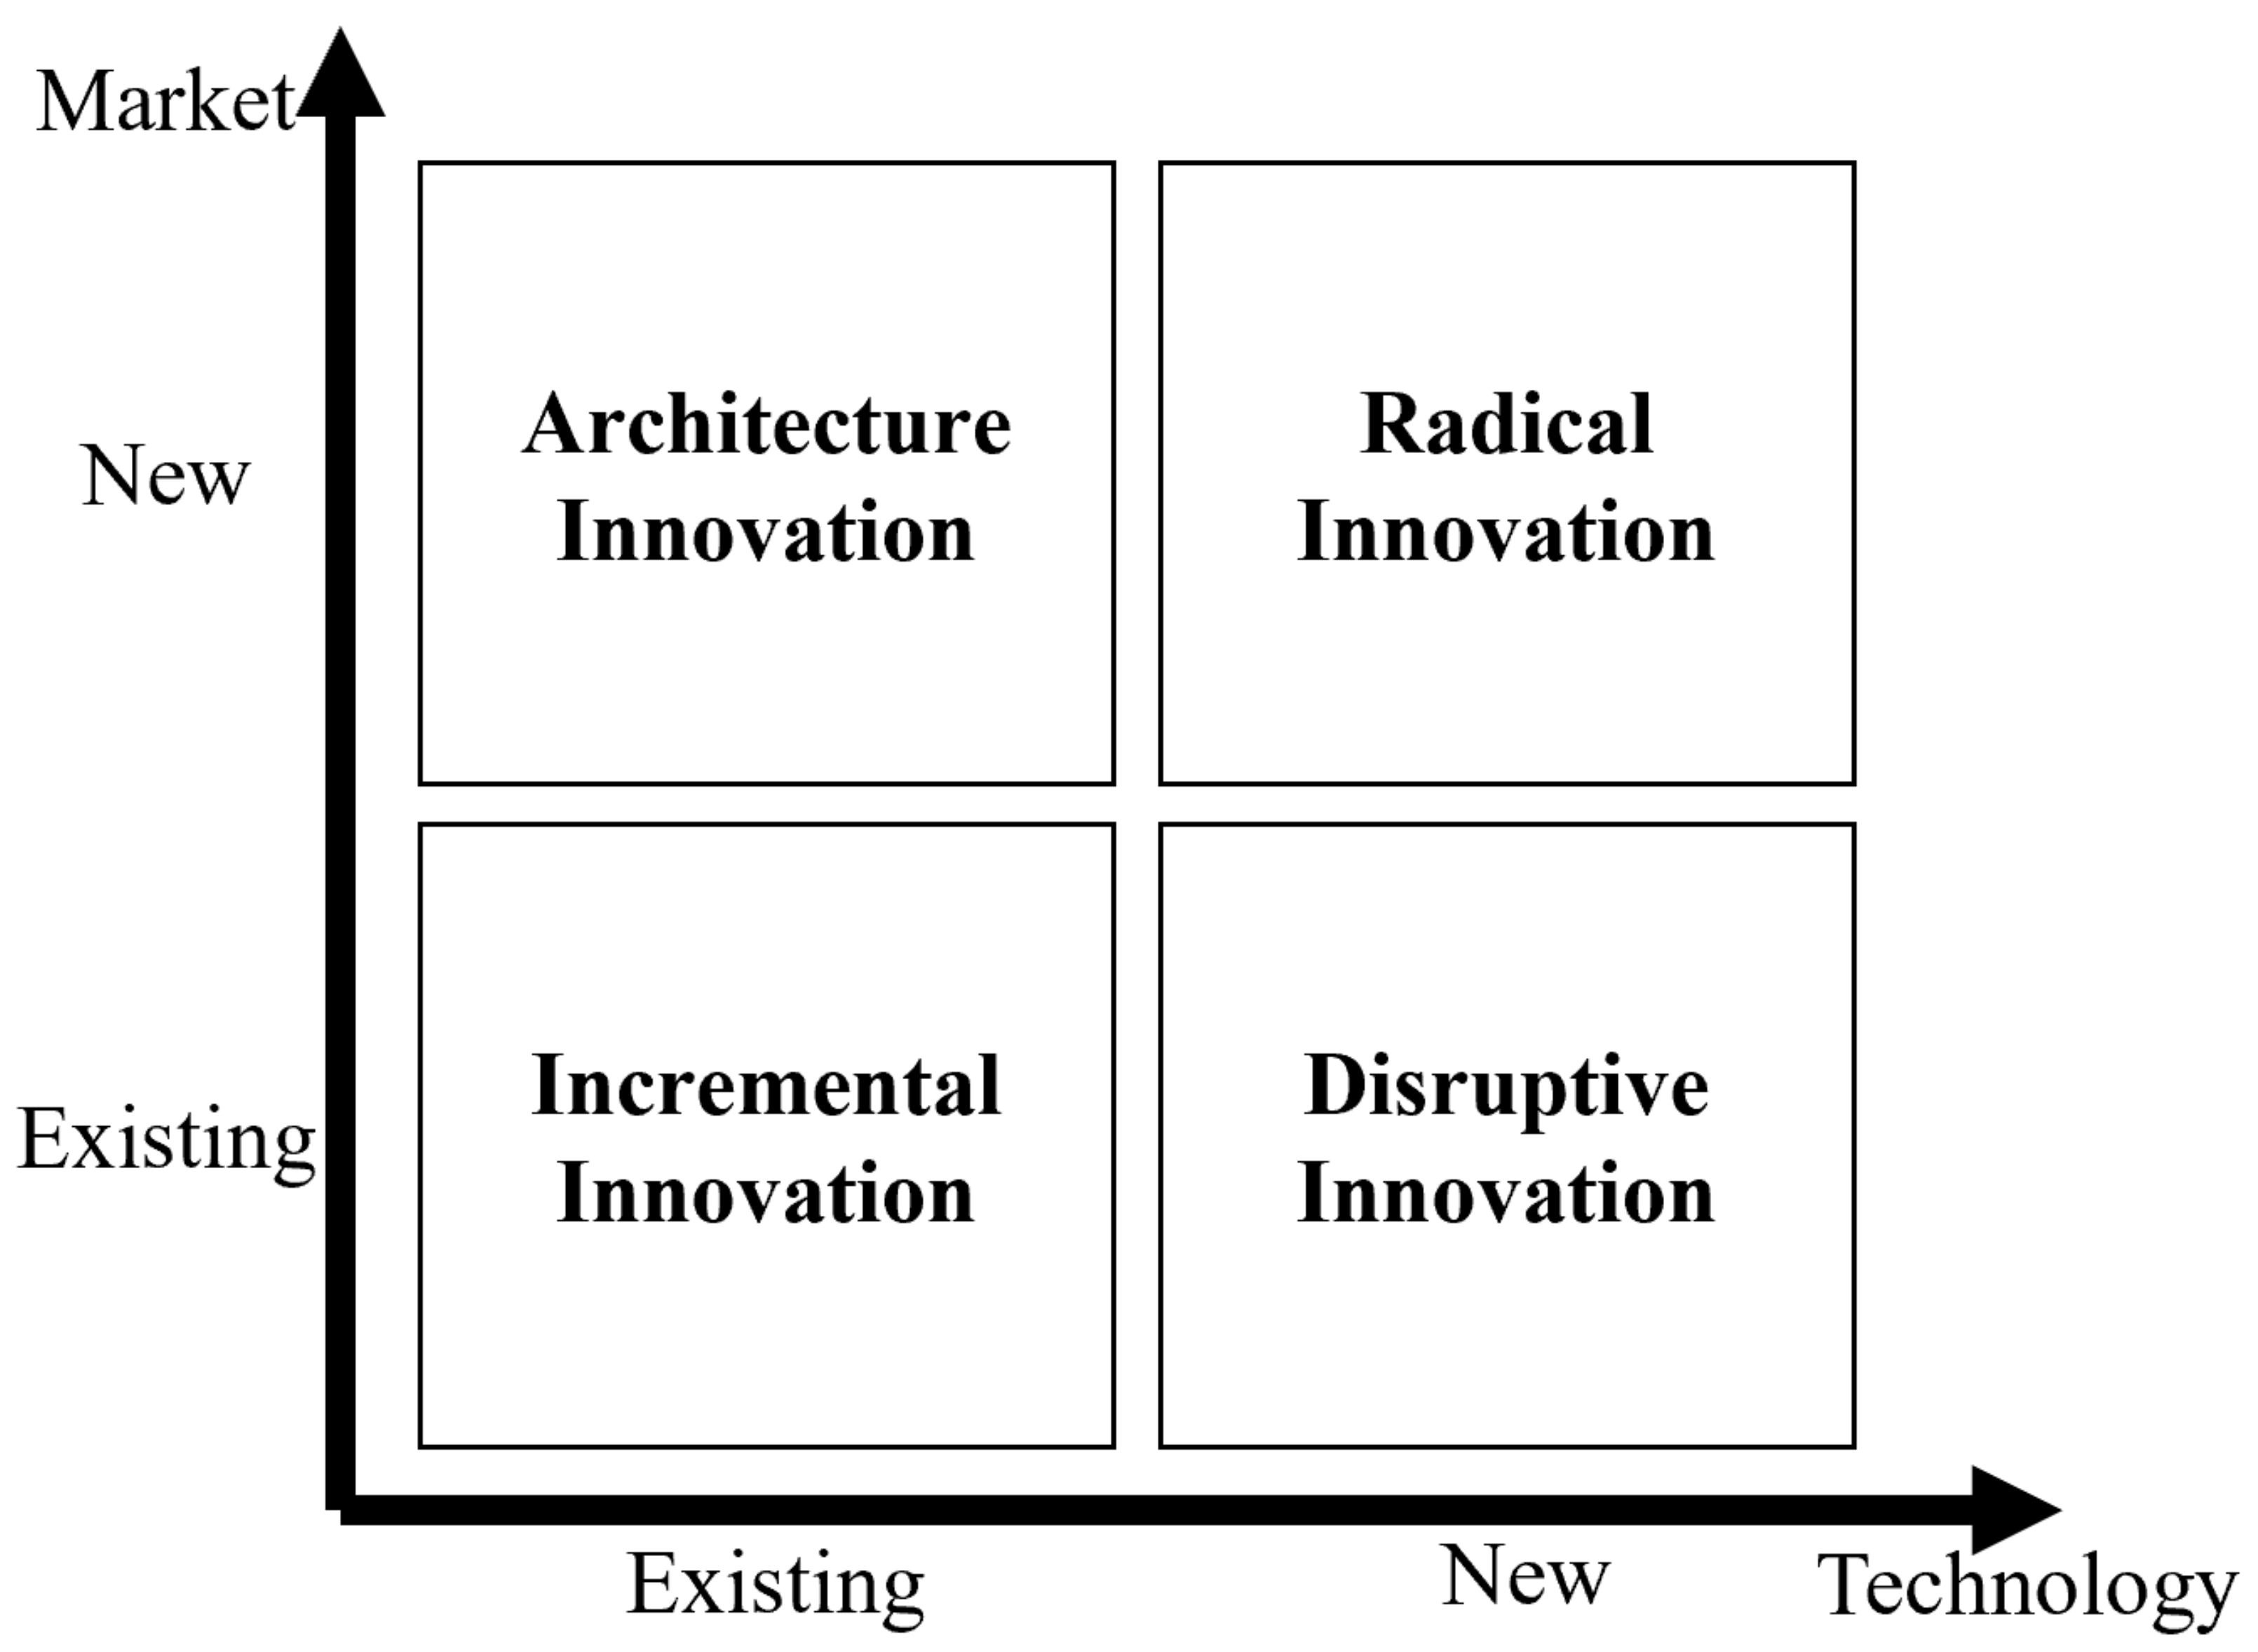 Radical Innovation synonyms - 212 Words and Phrases for Radical Innovation